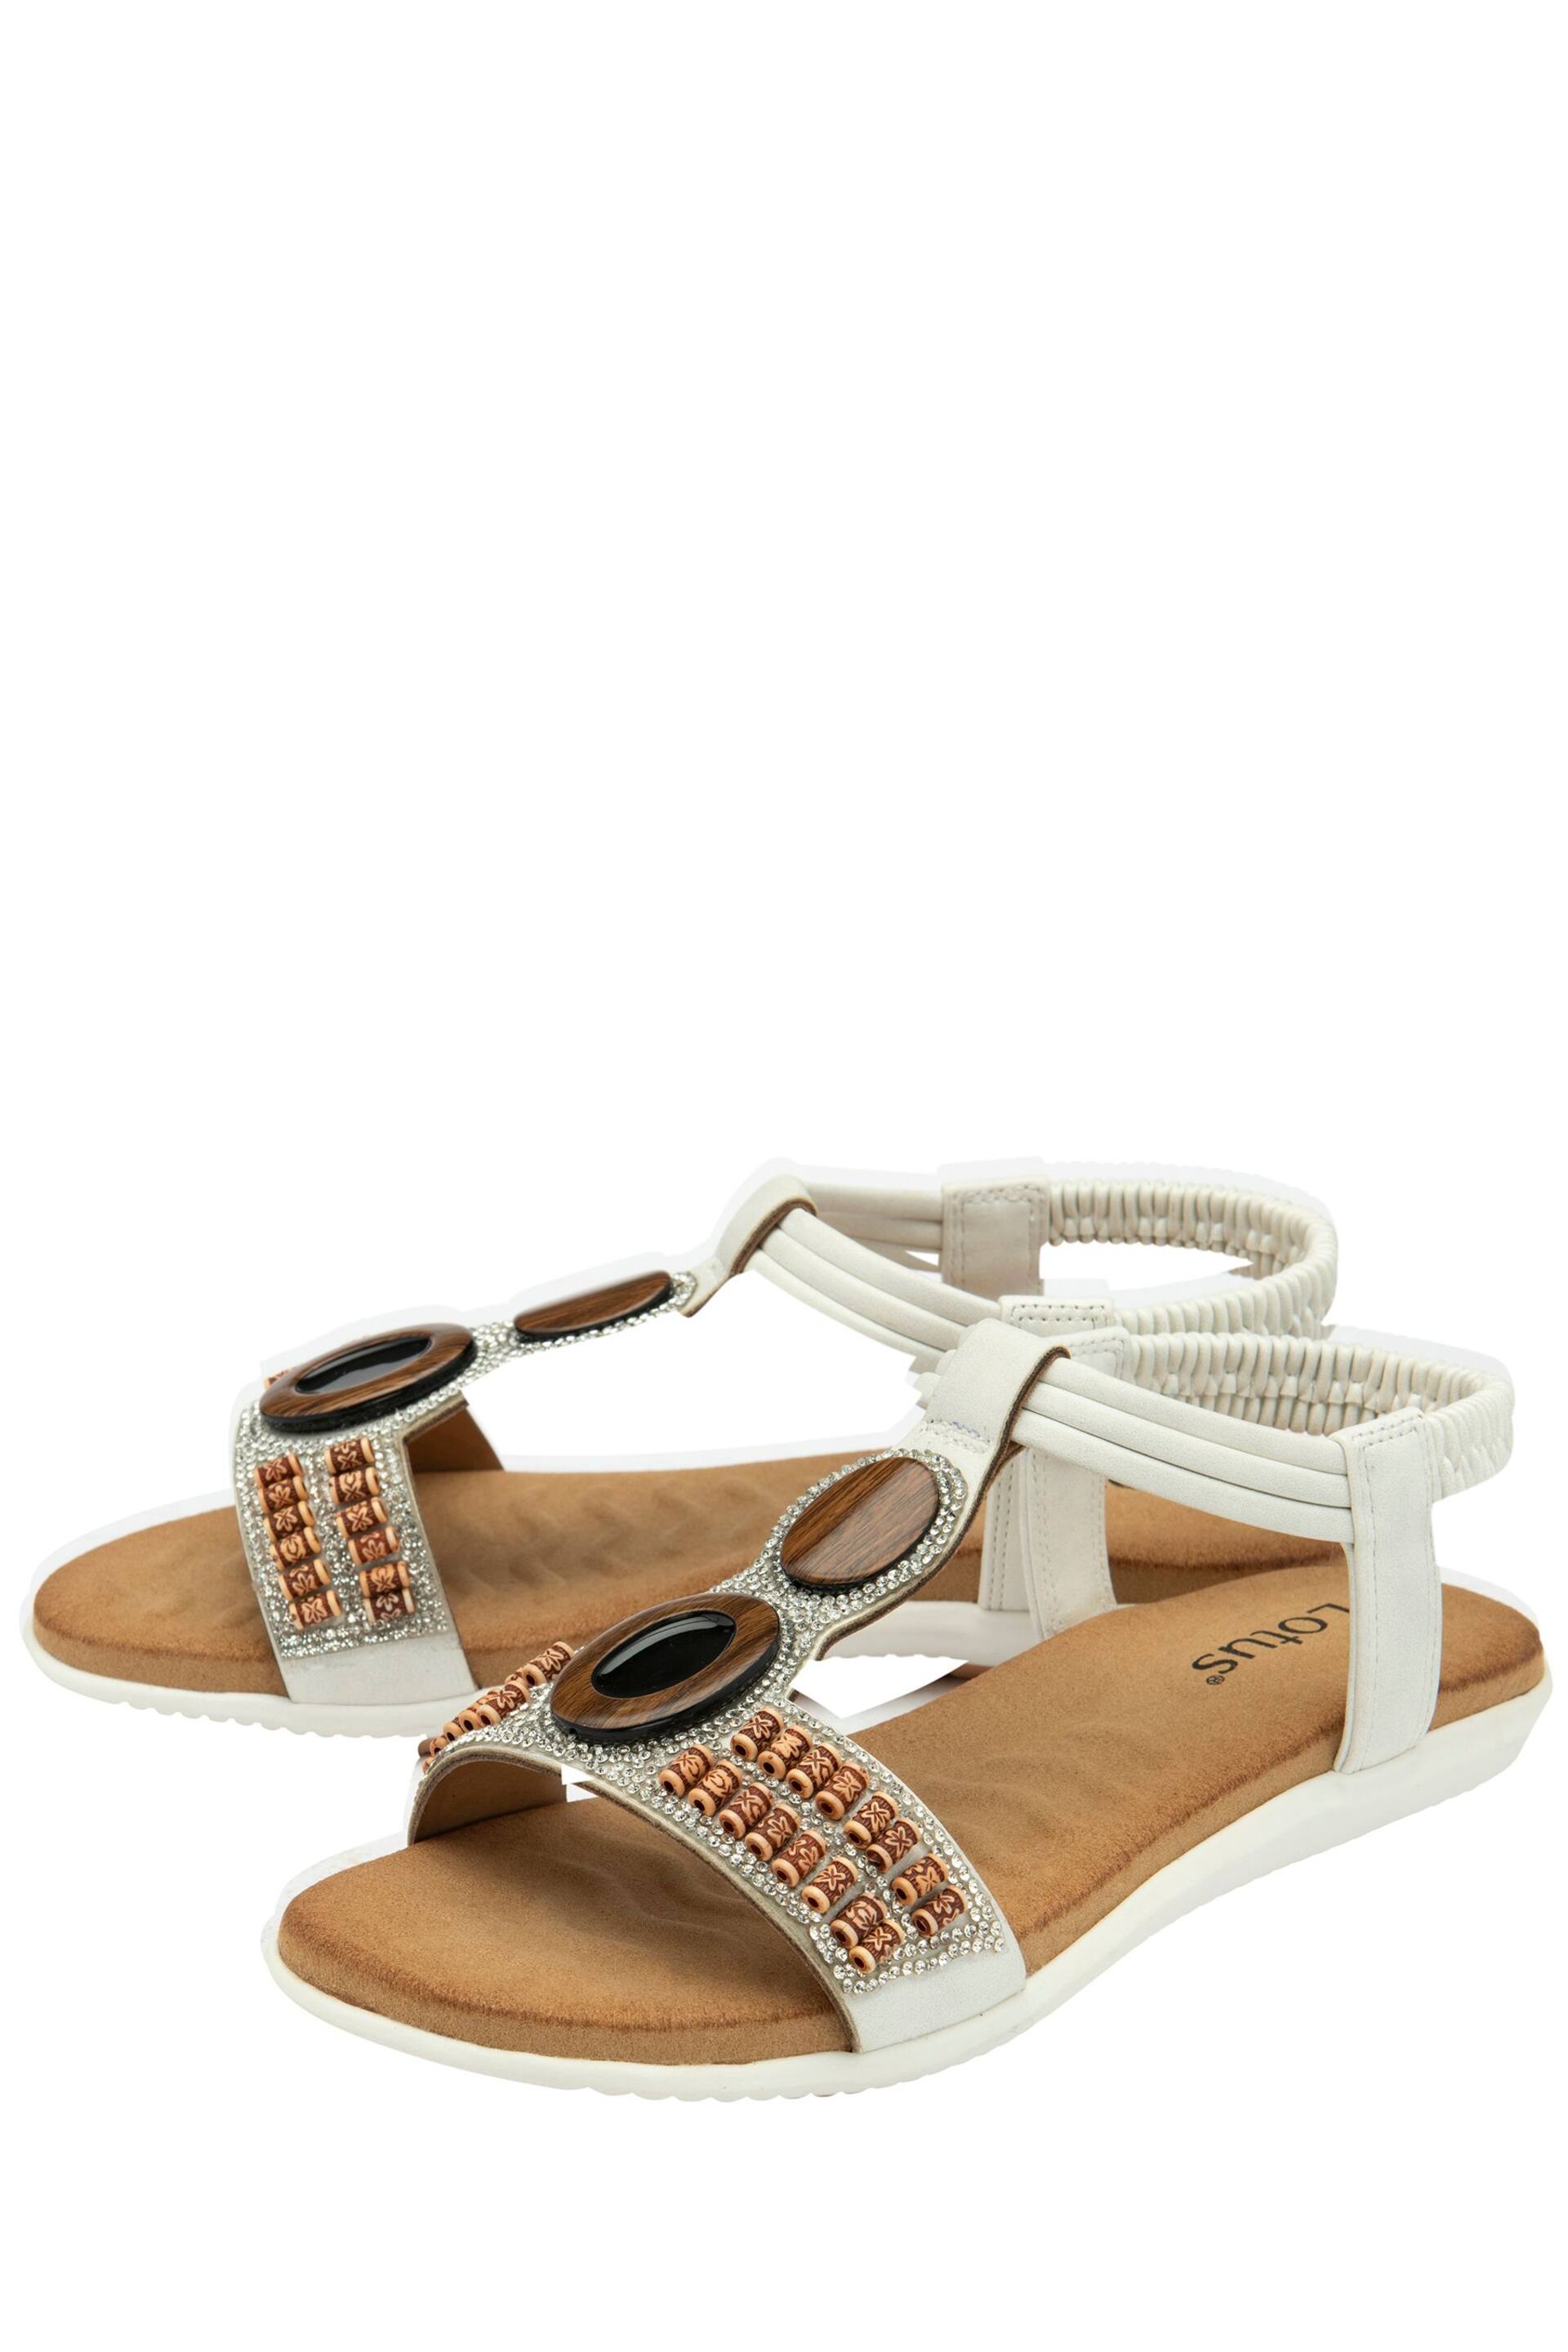 Lotus White Casual Low Wedge Sandals - Image 2 of 4